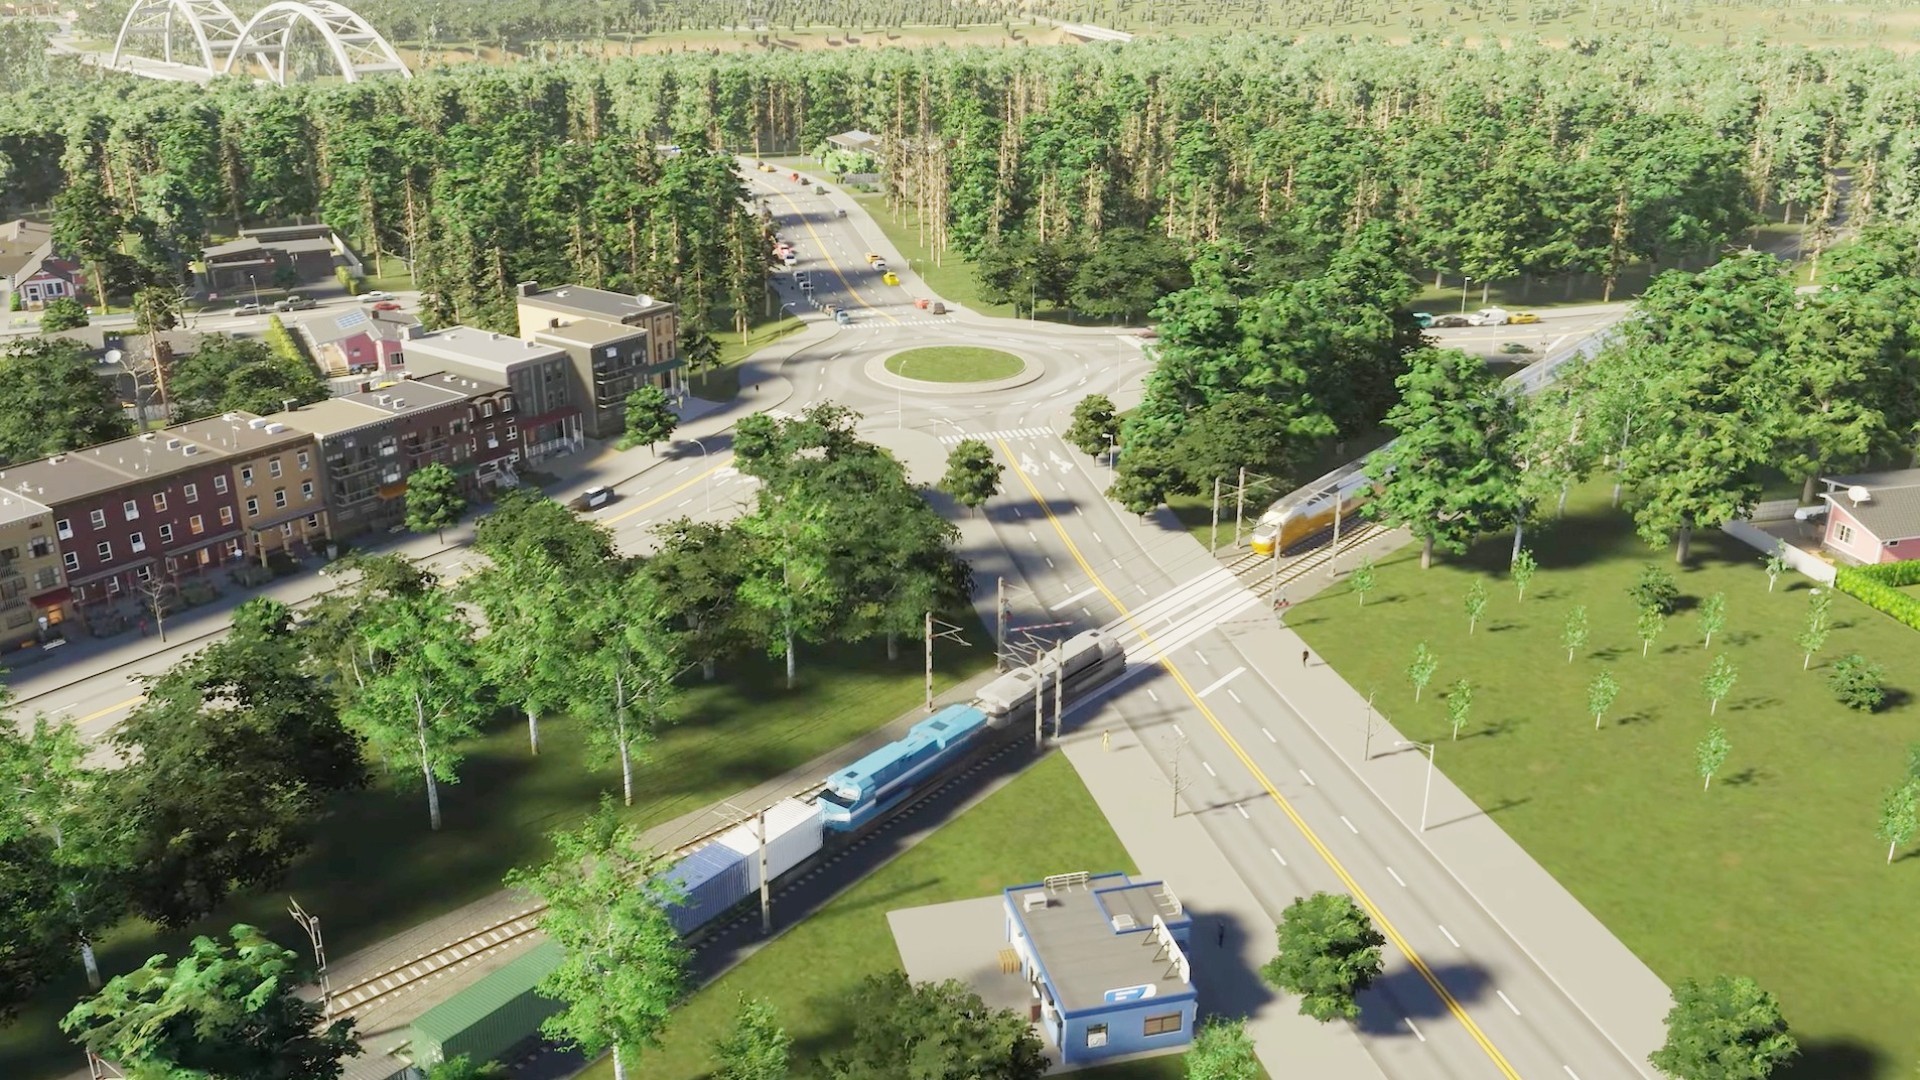 Cities Skylines 2 apparently includes a feature we thought was removed